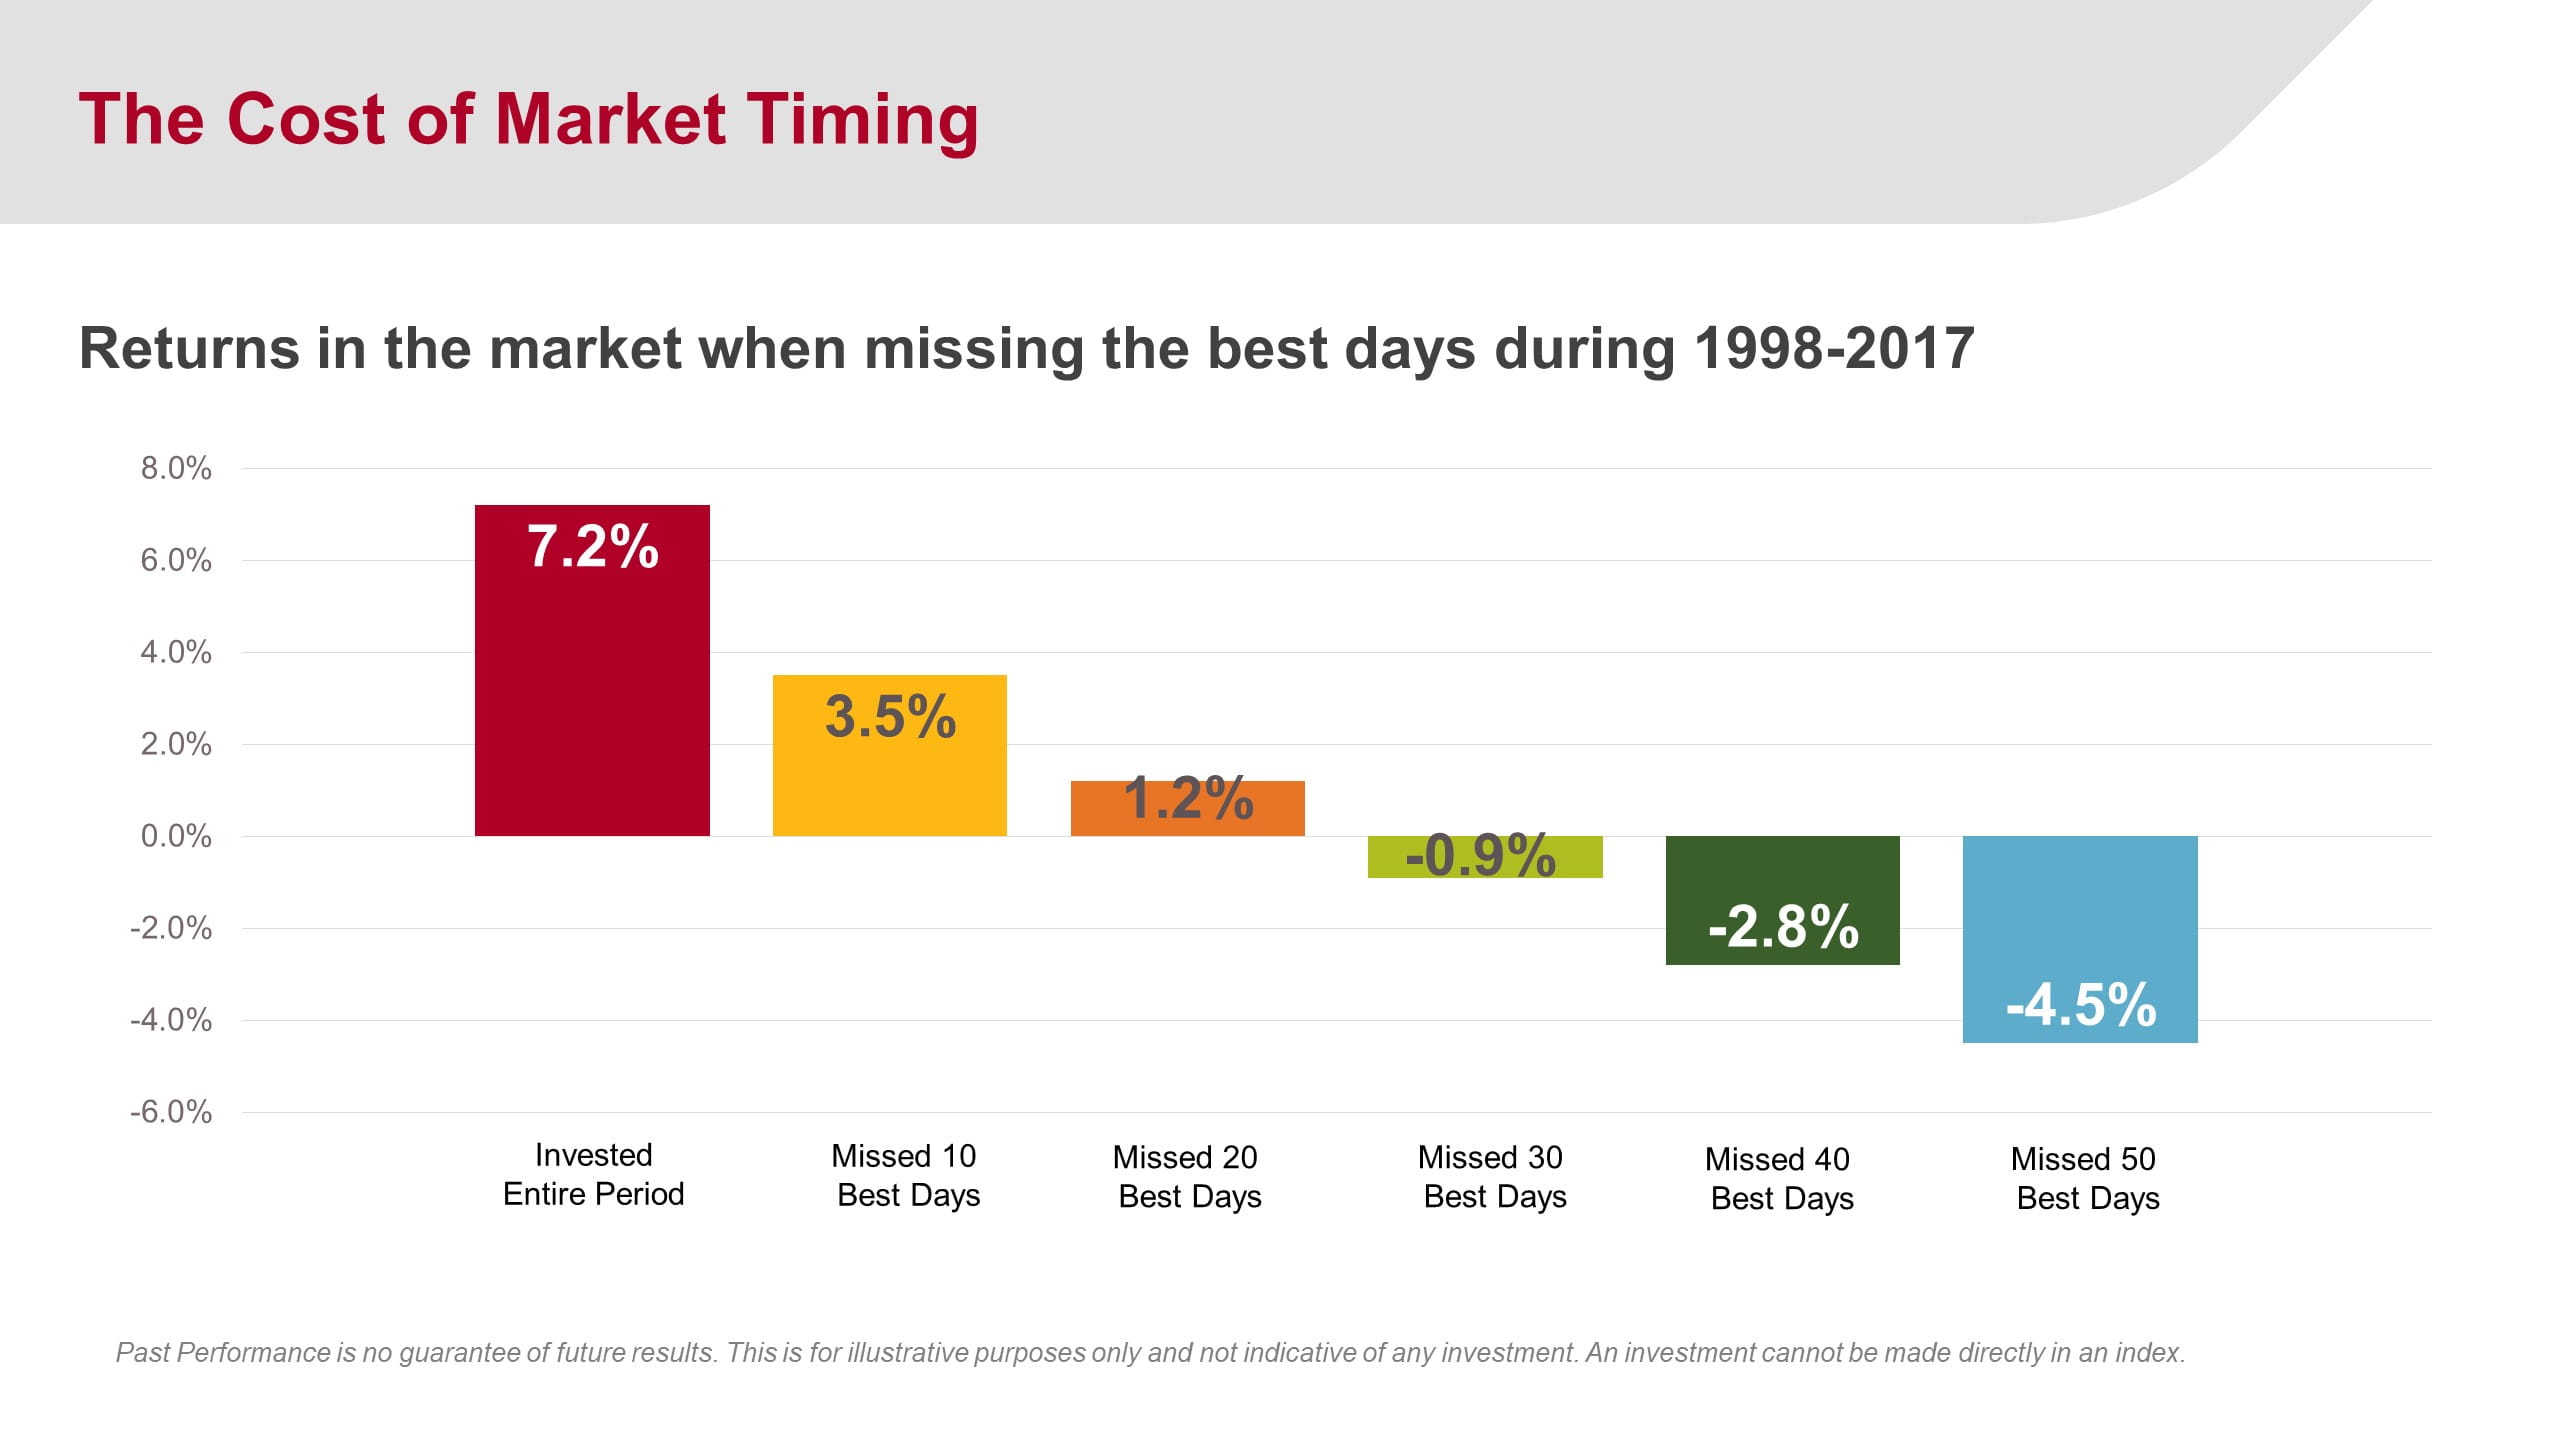 Graph of the Cost of Market Timing